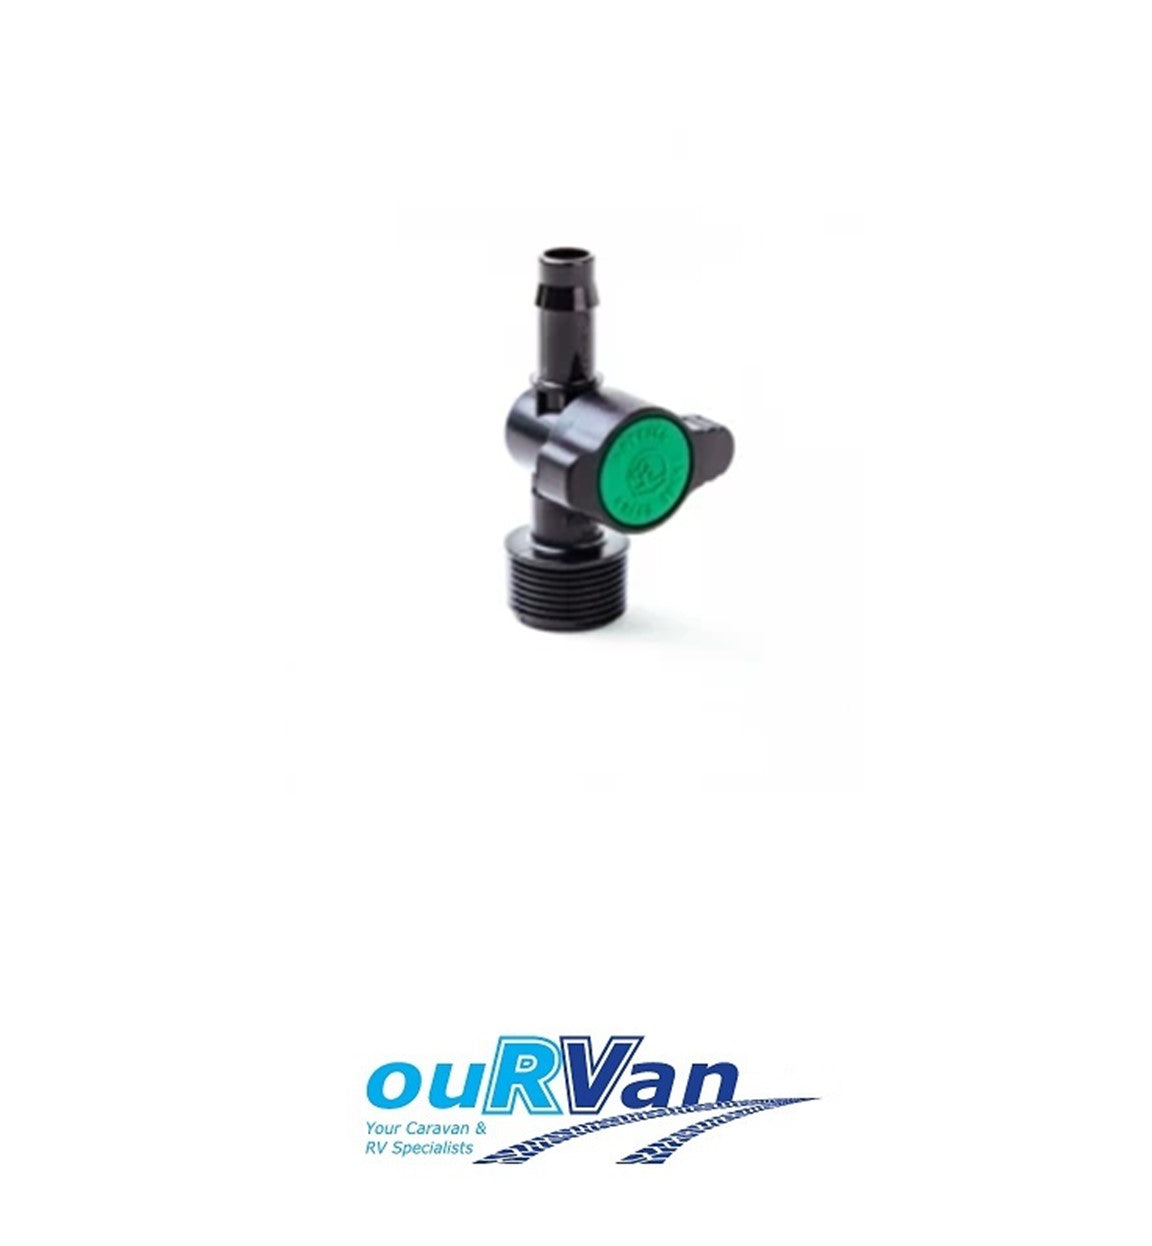 Hume Green Valve Tap Threaded 3/4